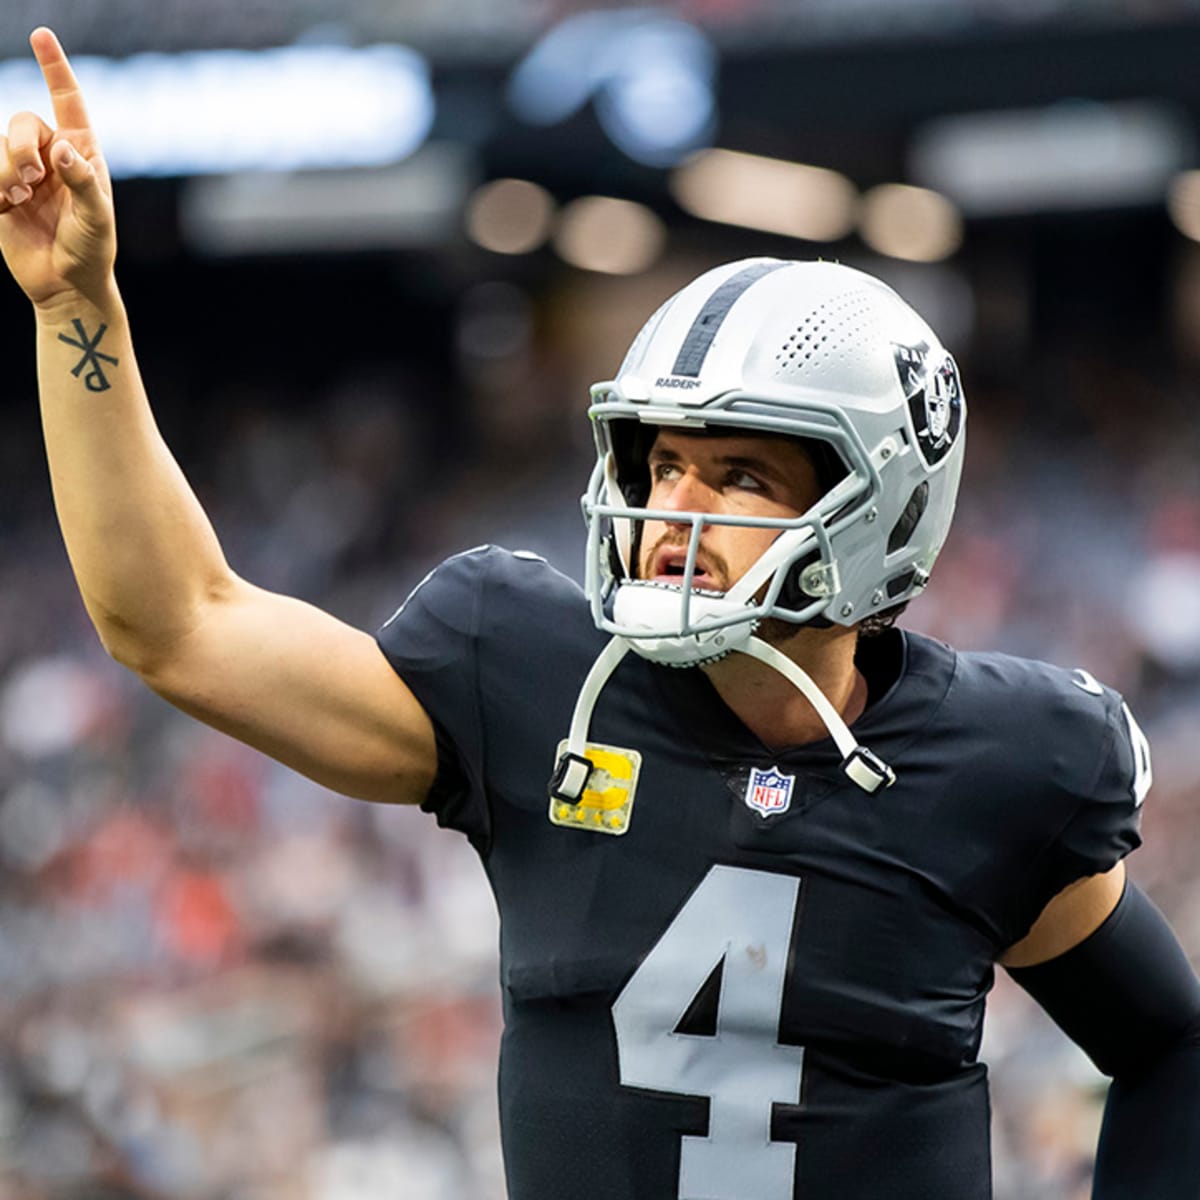 Raiders finally treat Derek Carr as franchise QB with new contract